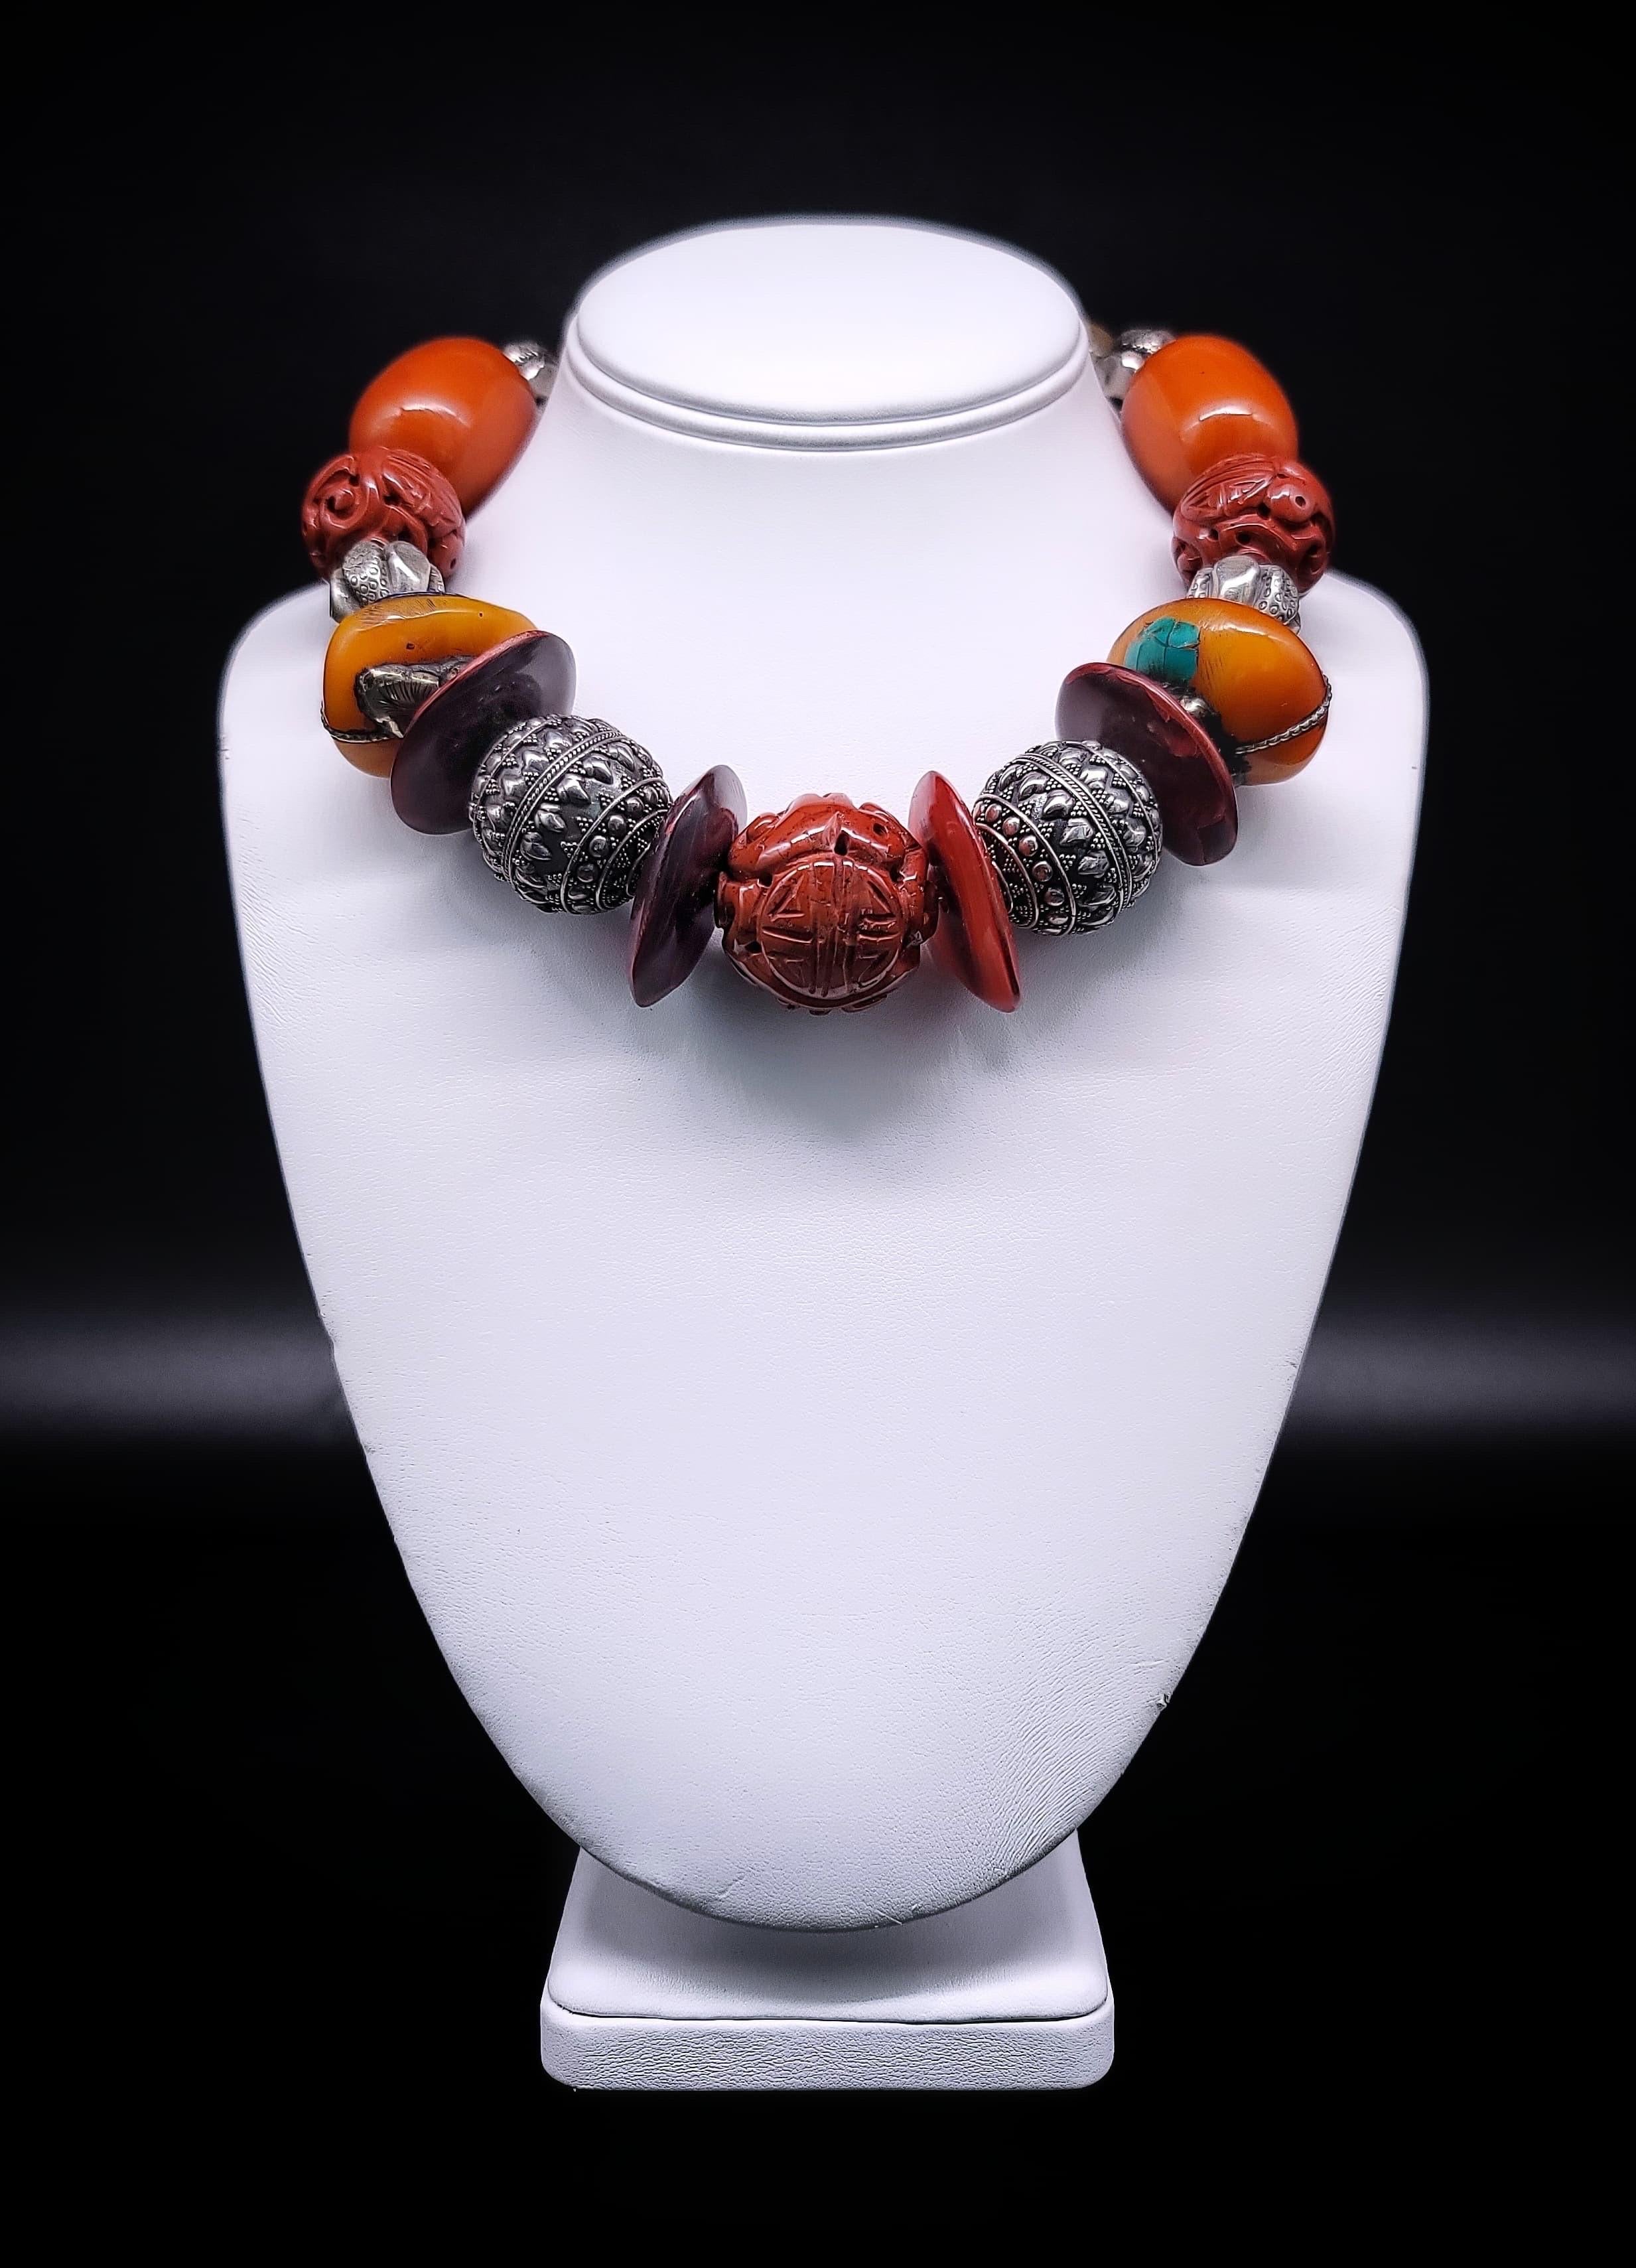 A.Jeschel Tibetan Amber necklace with Carved Ceramic. 9